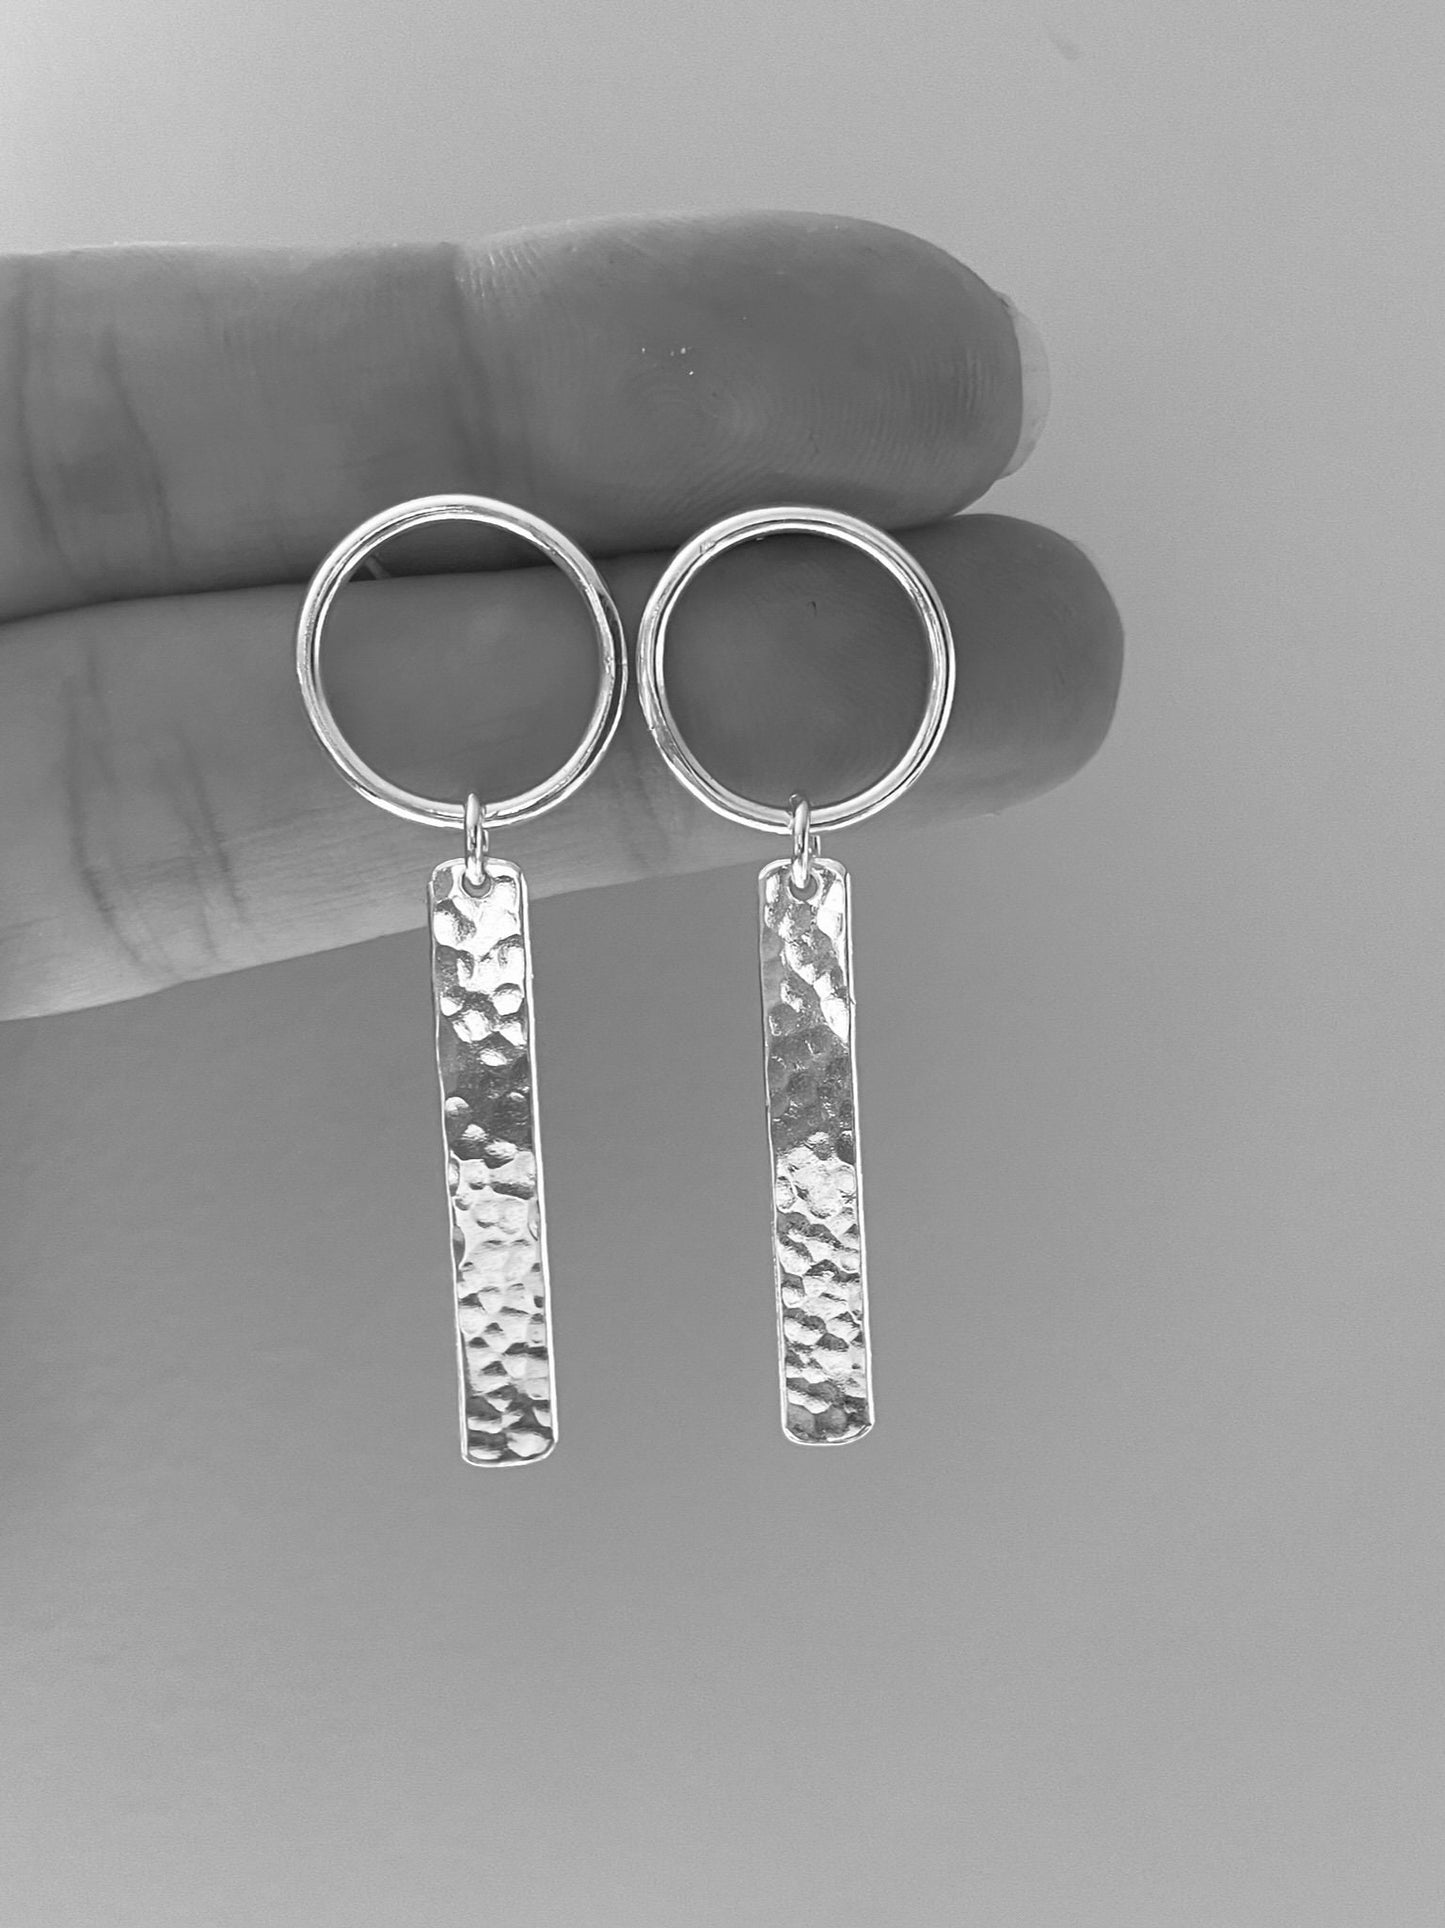 Silver bar and circle earrings